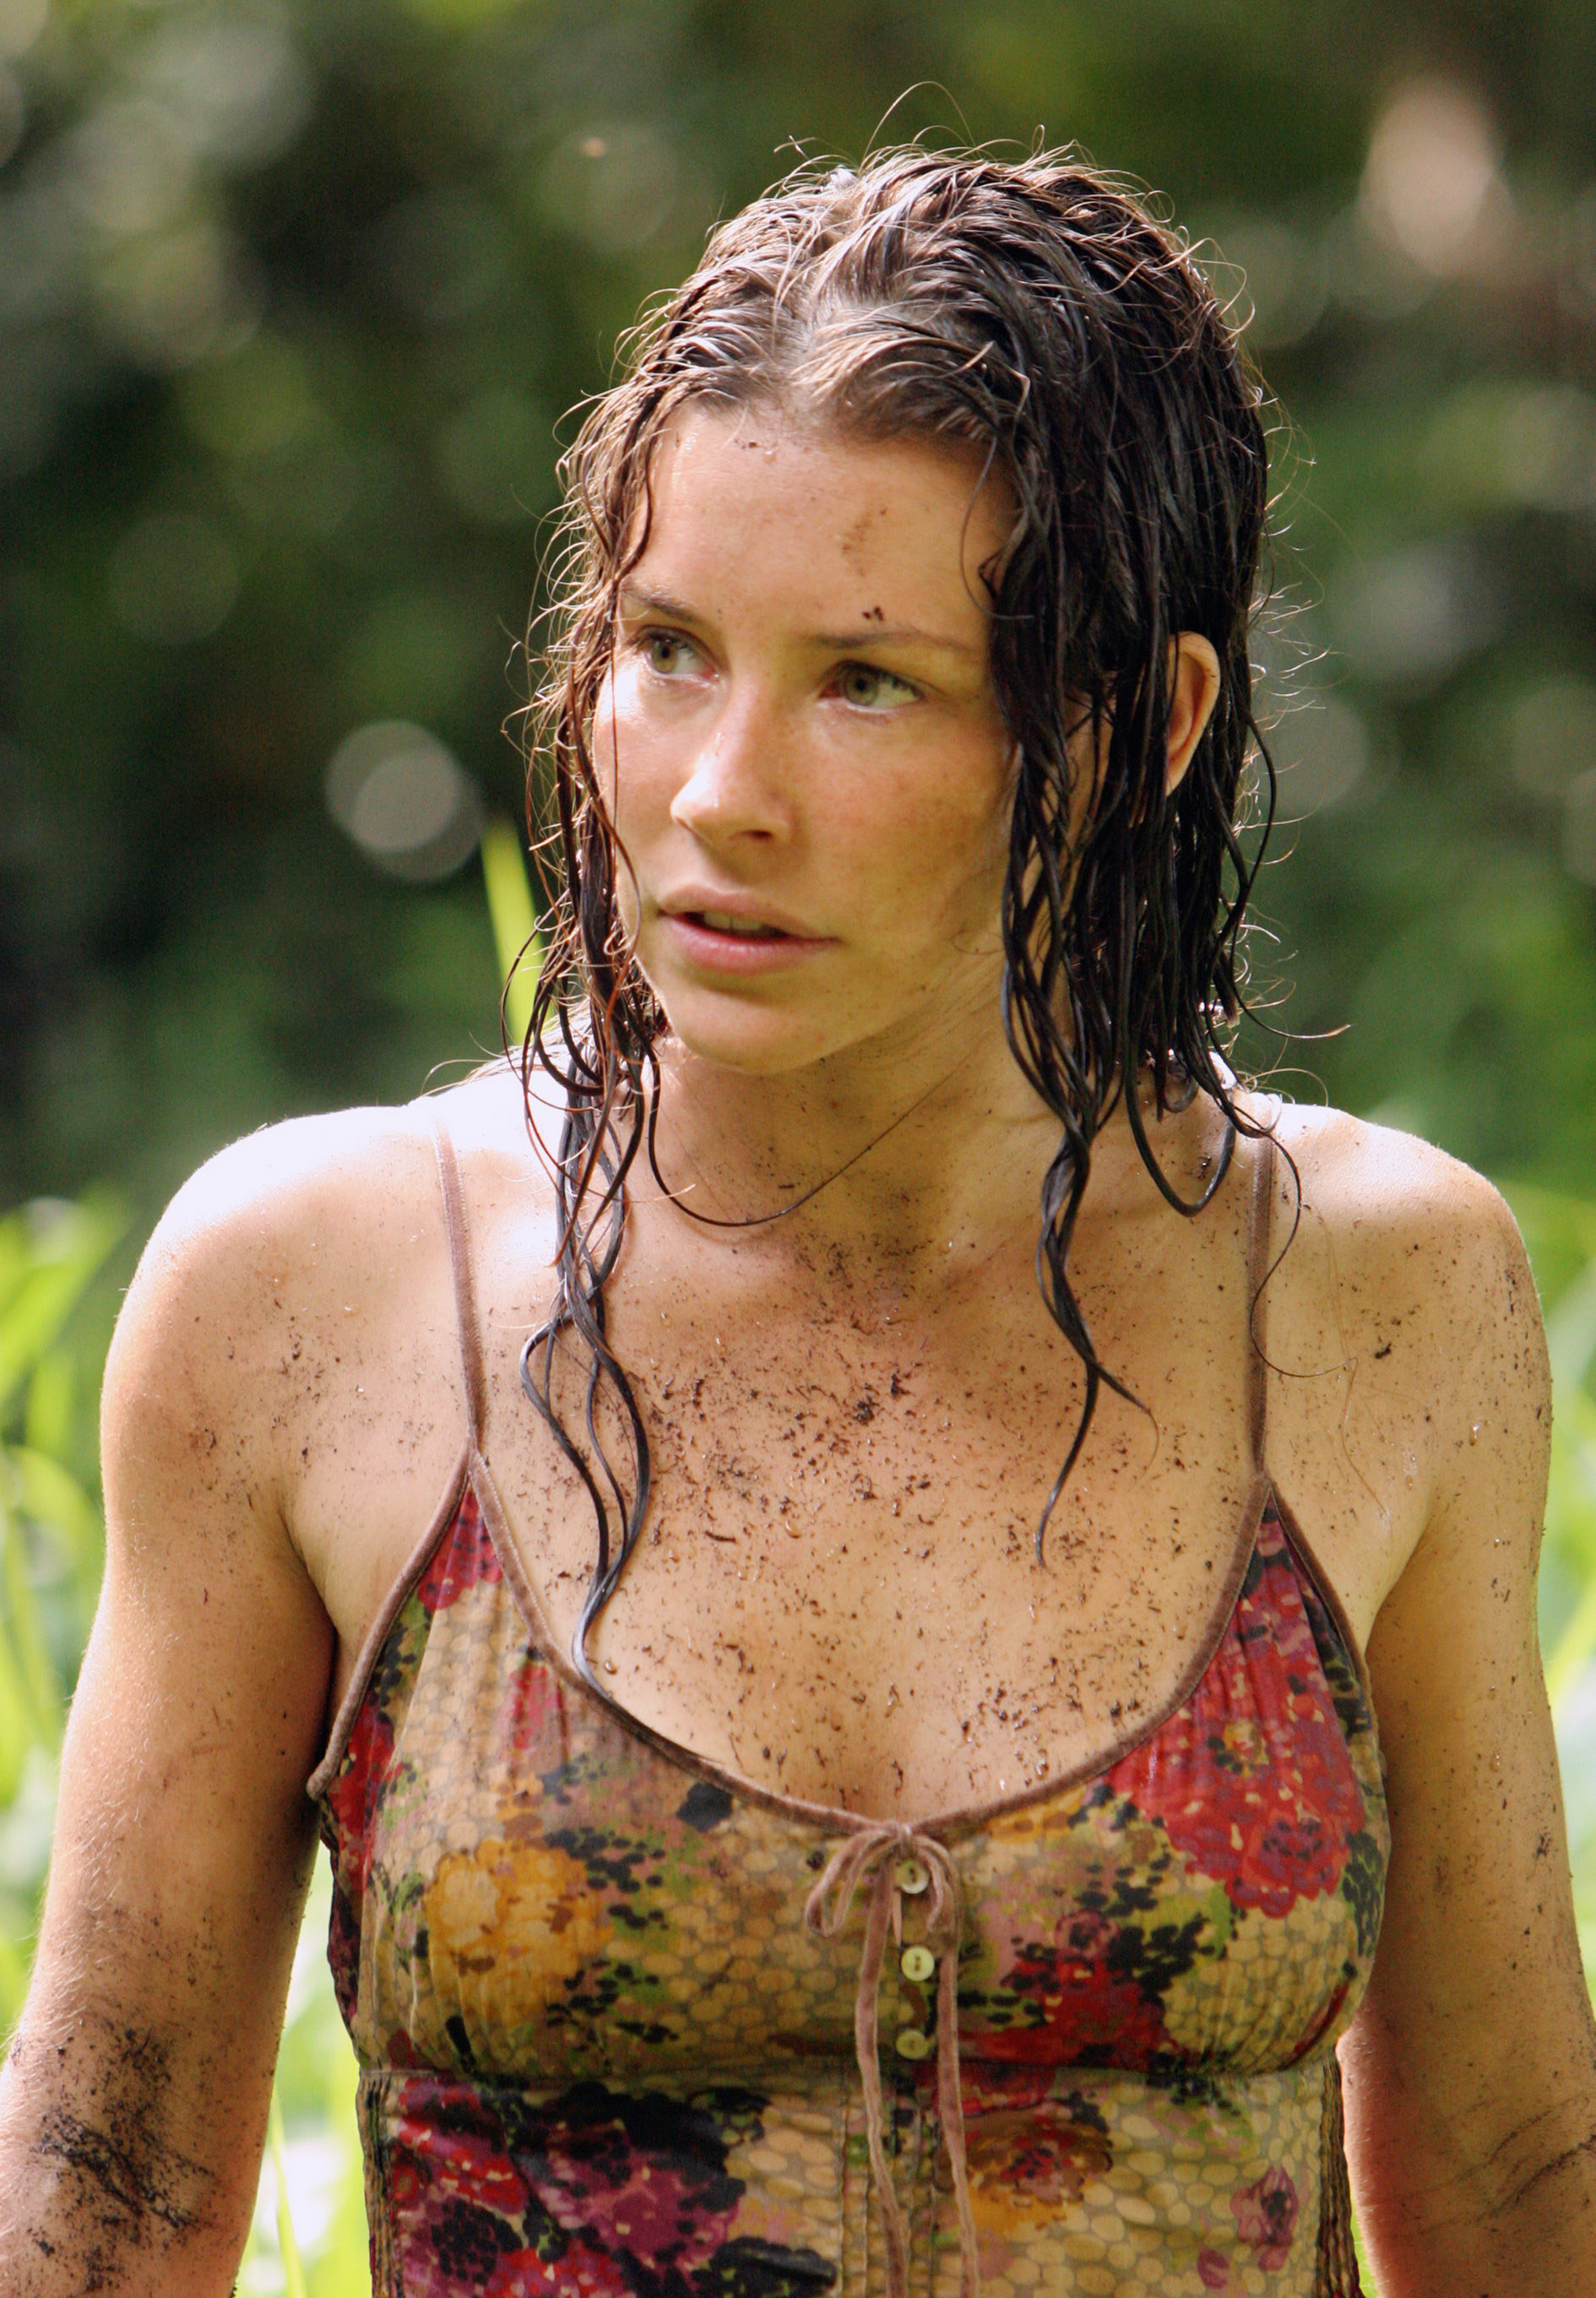 Evangeline Lilly is covered in dirt in the wild as Kate in &quot;Lost&quot;